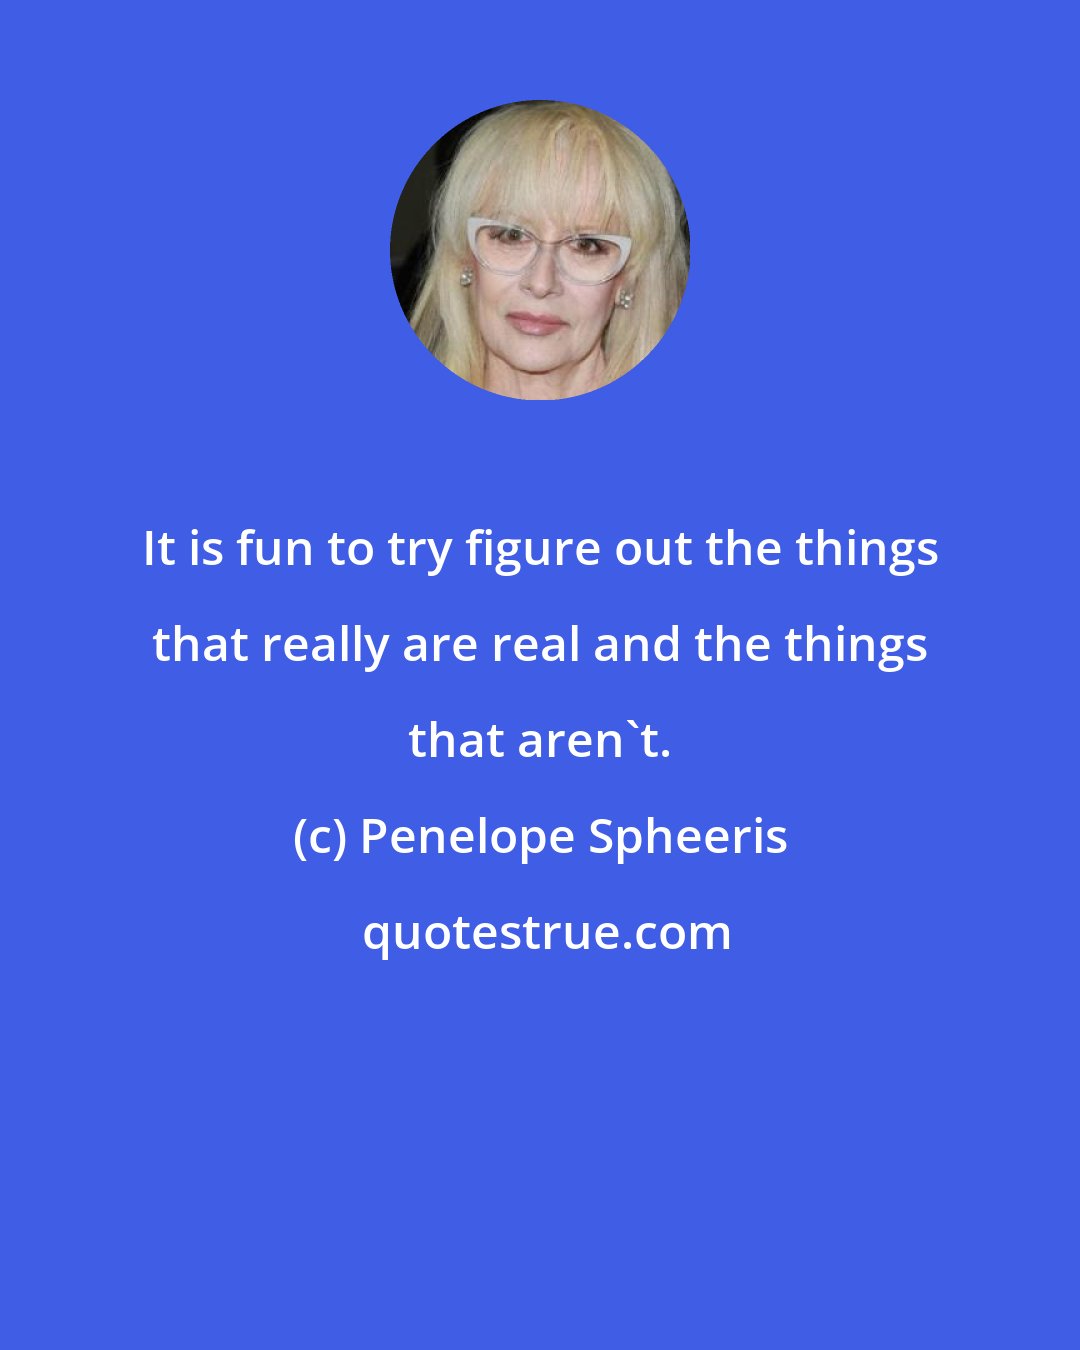 Penelope Spheeris: It is fun to try figure out the things that really are real and the things that aren't.